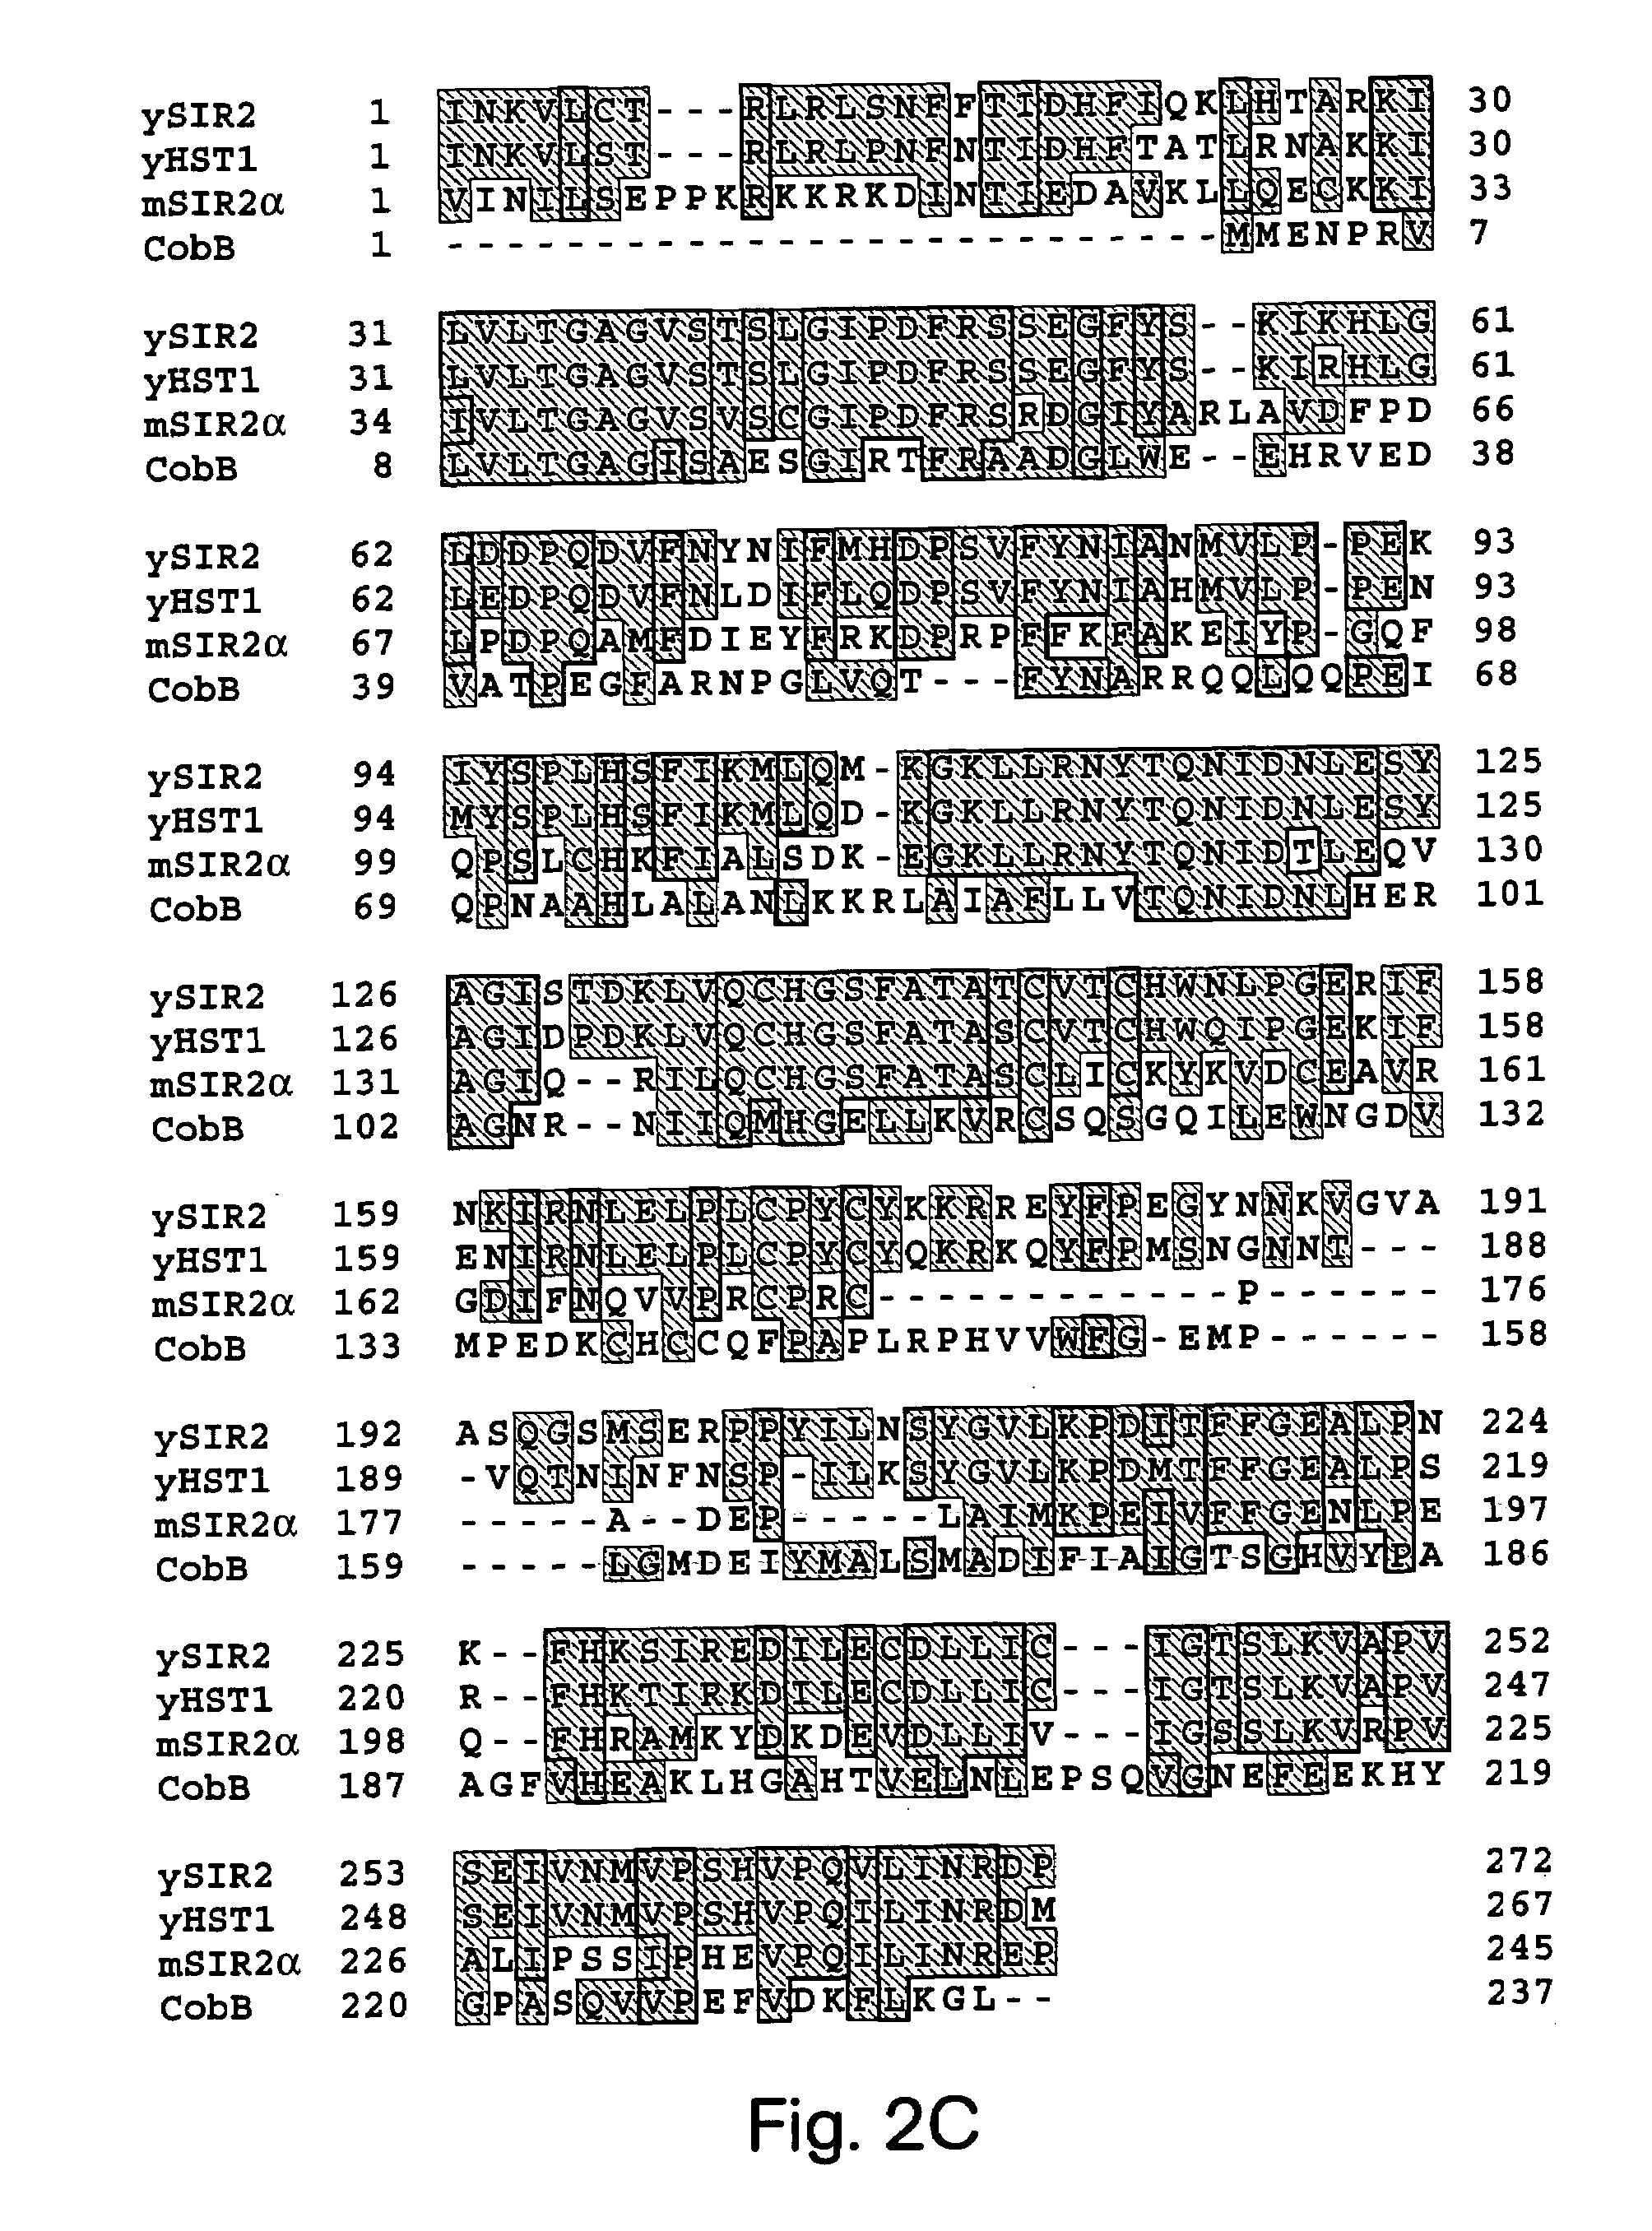 Methods for identifying agents which alter histone protein acetylation